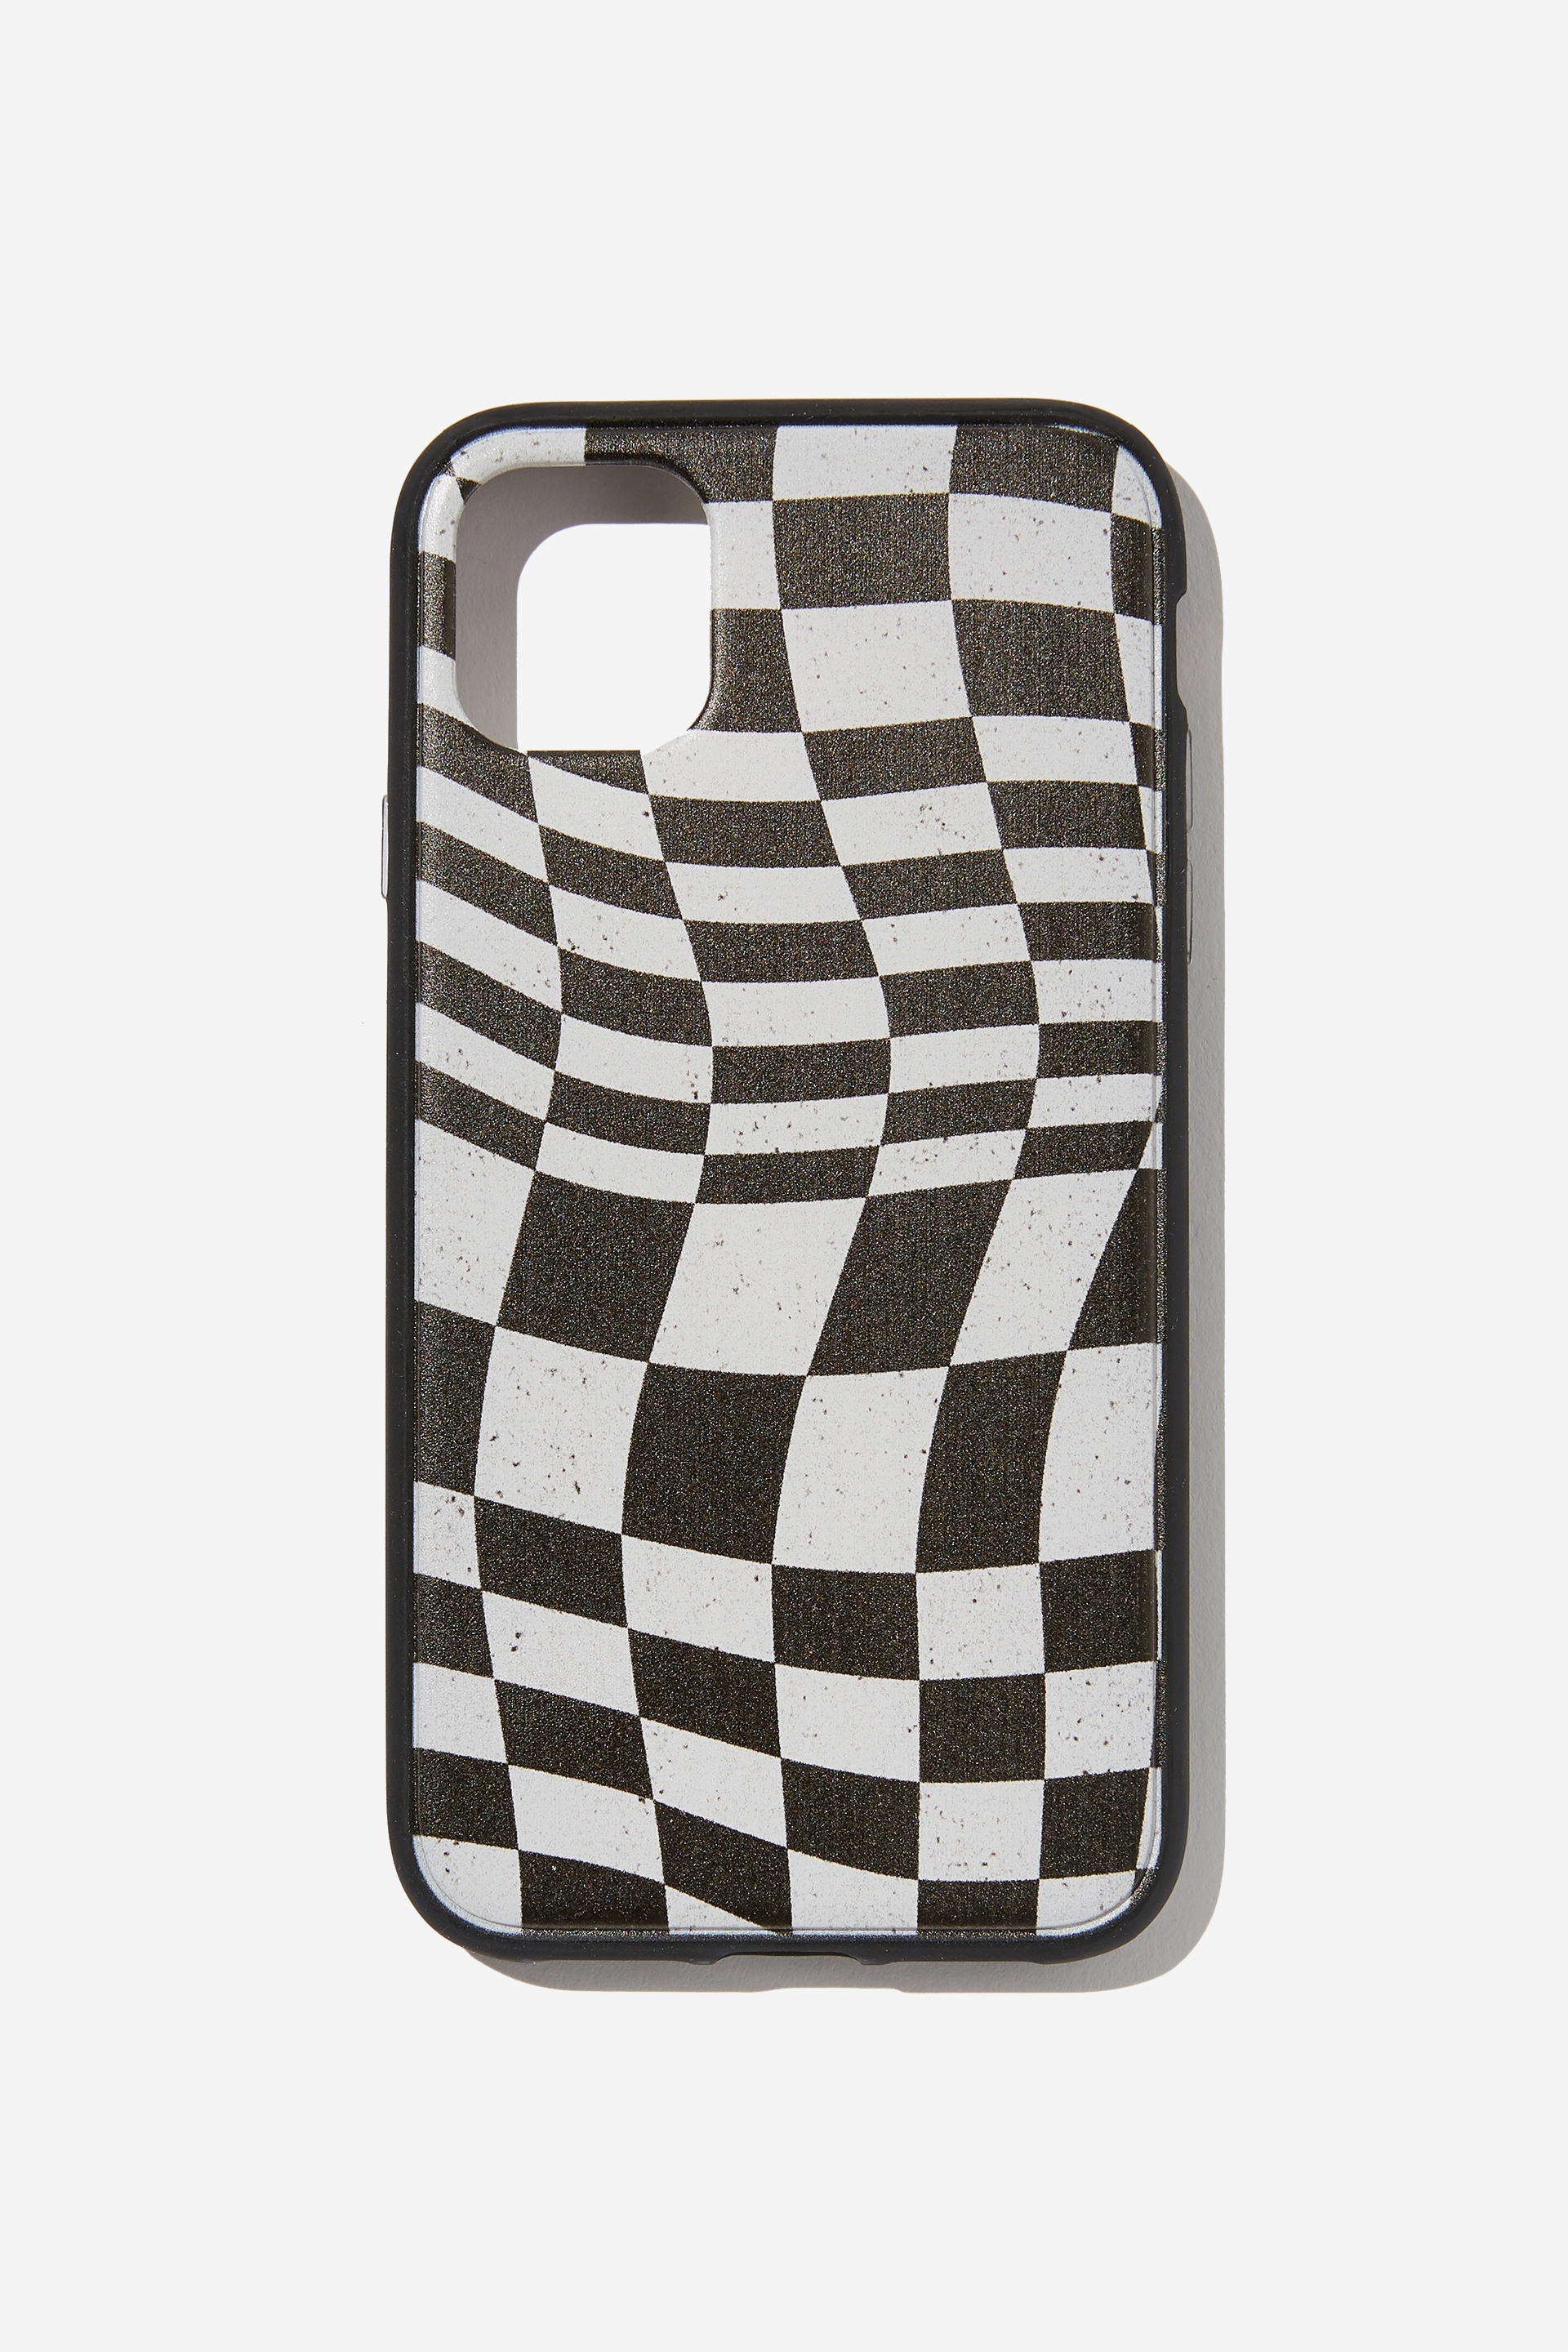 Typo - Protective Phone Case iPhone 11 - Warped checkerboard